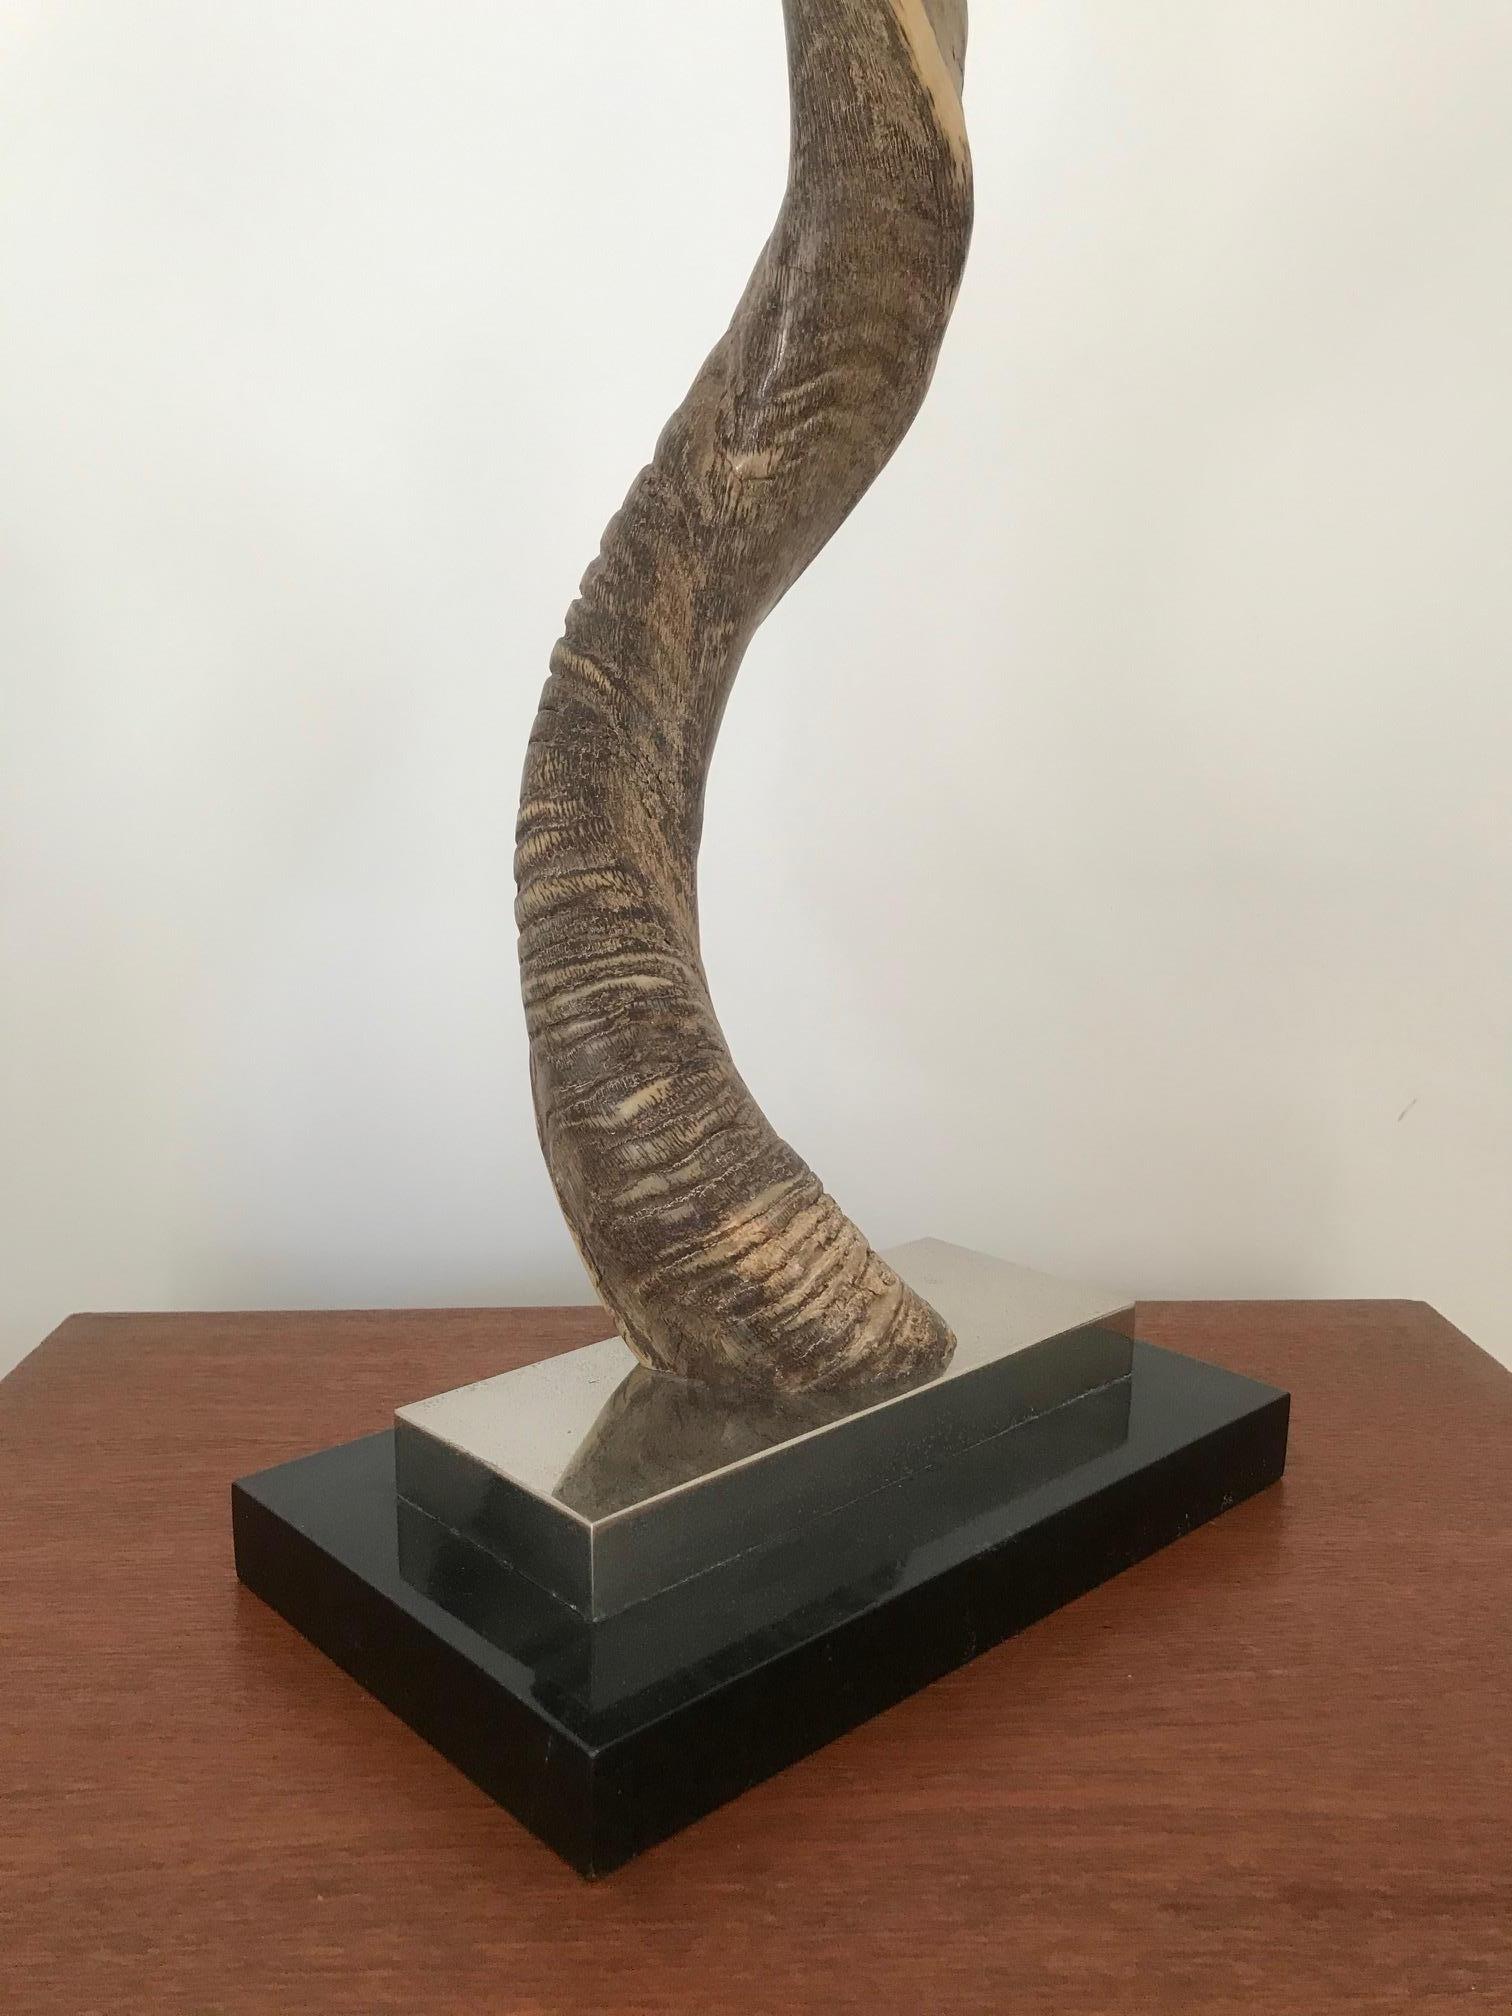 Late 20th Century Organic Modern African Kudu Horn Sculpture Mounted on Stand, Vintage, 1980s